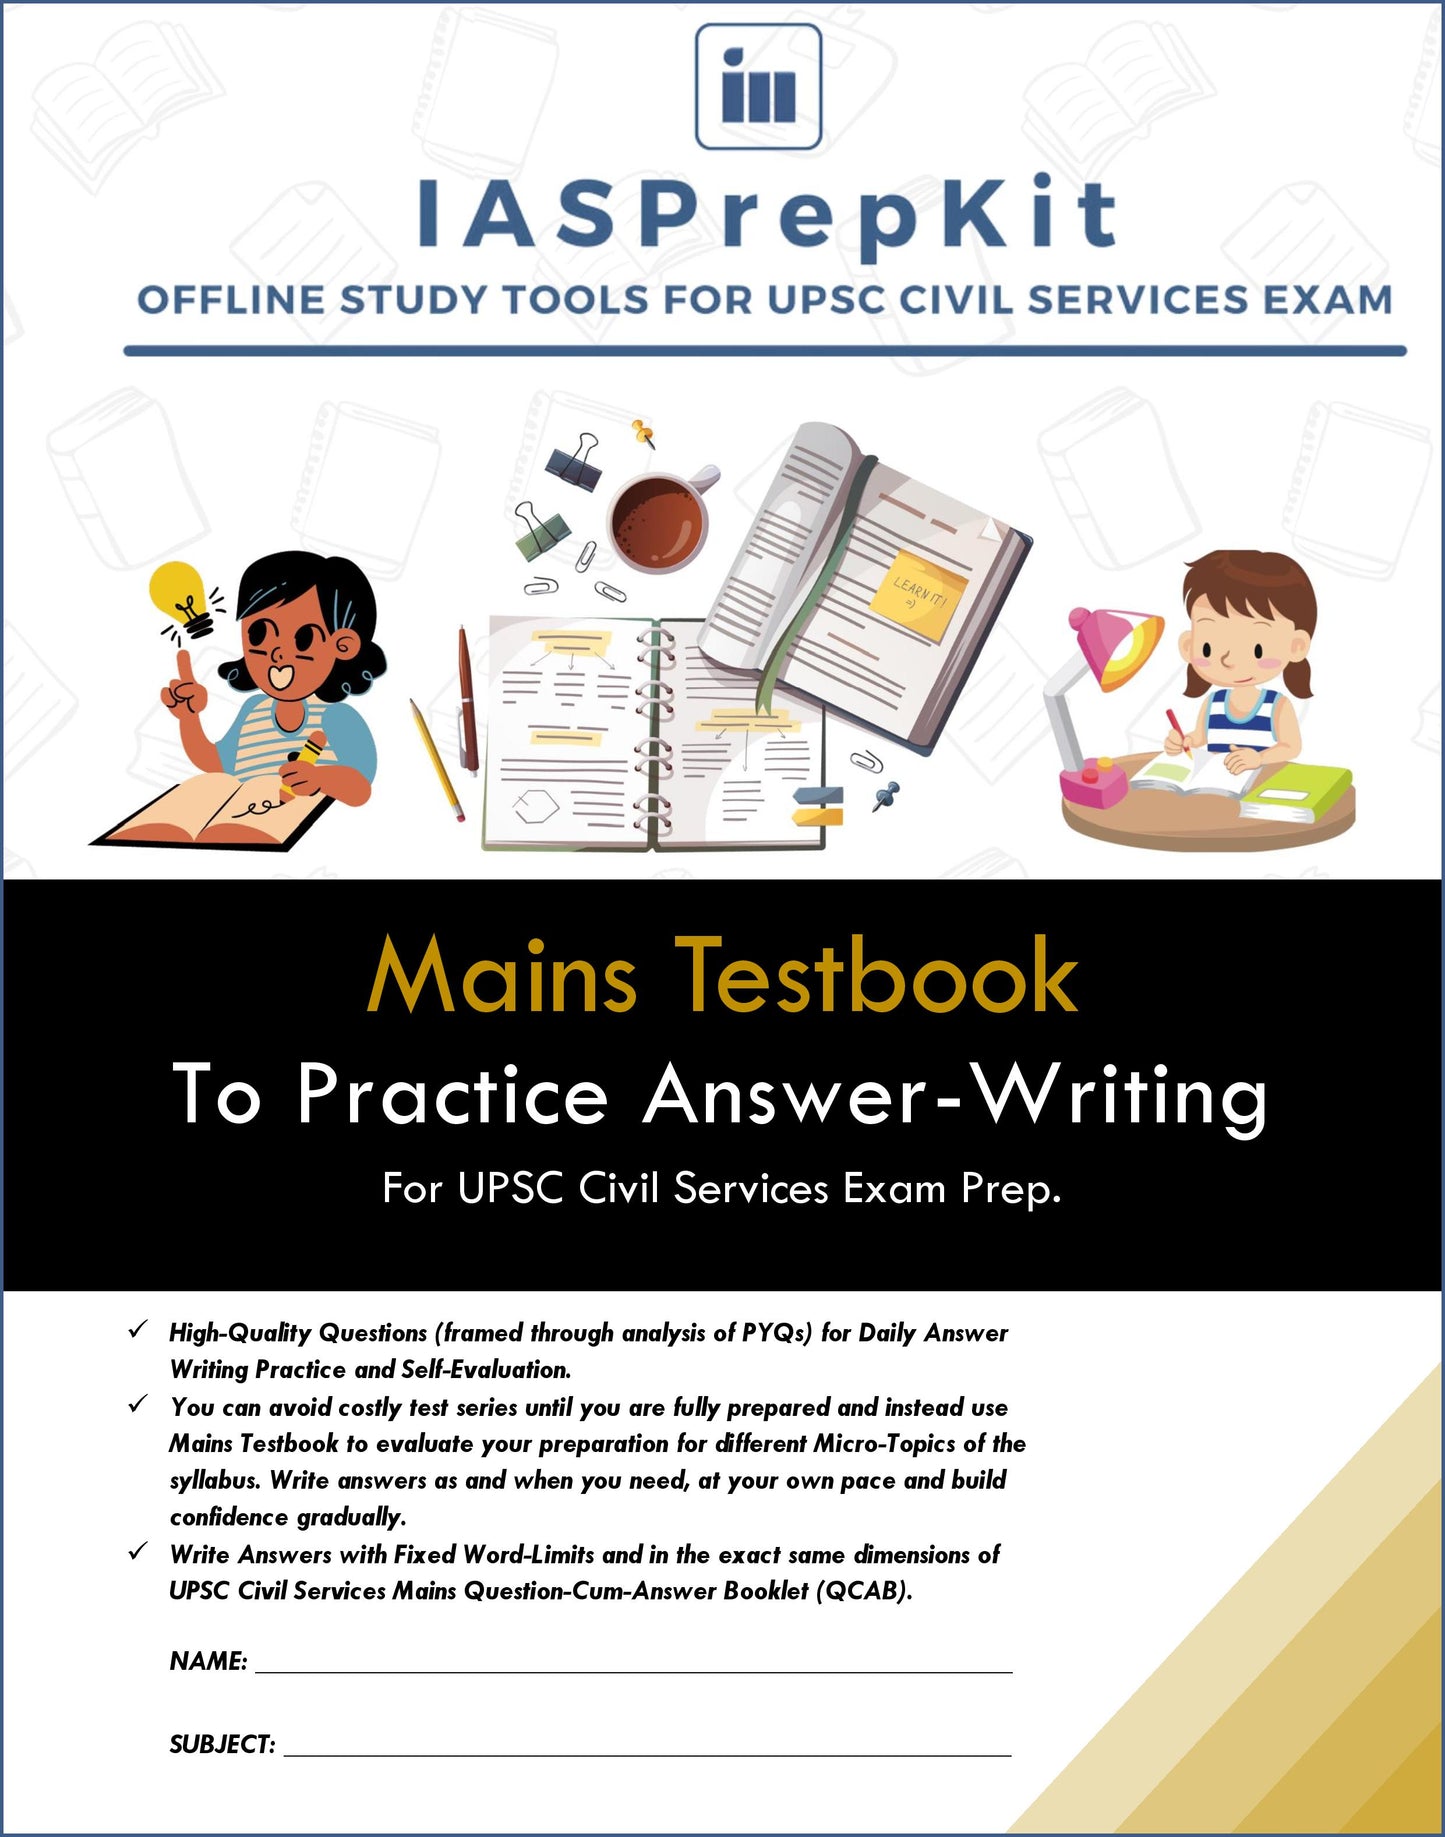 GS 4 - Mains Testbook to Practice Daily Answer-Writing & Self-Evaluation for UPSC Civil Services Exam Prep. (140 Questions)